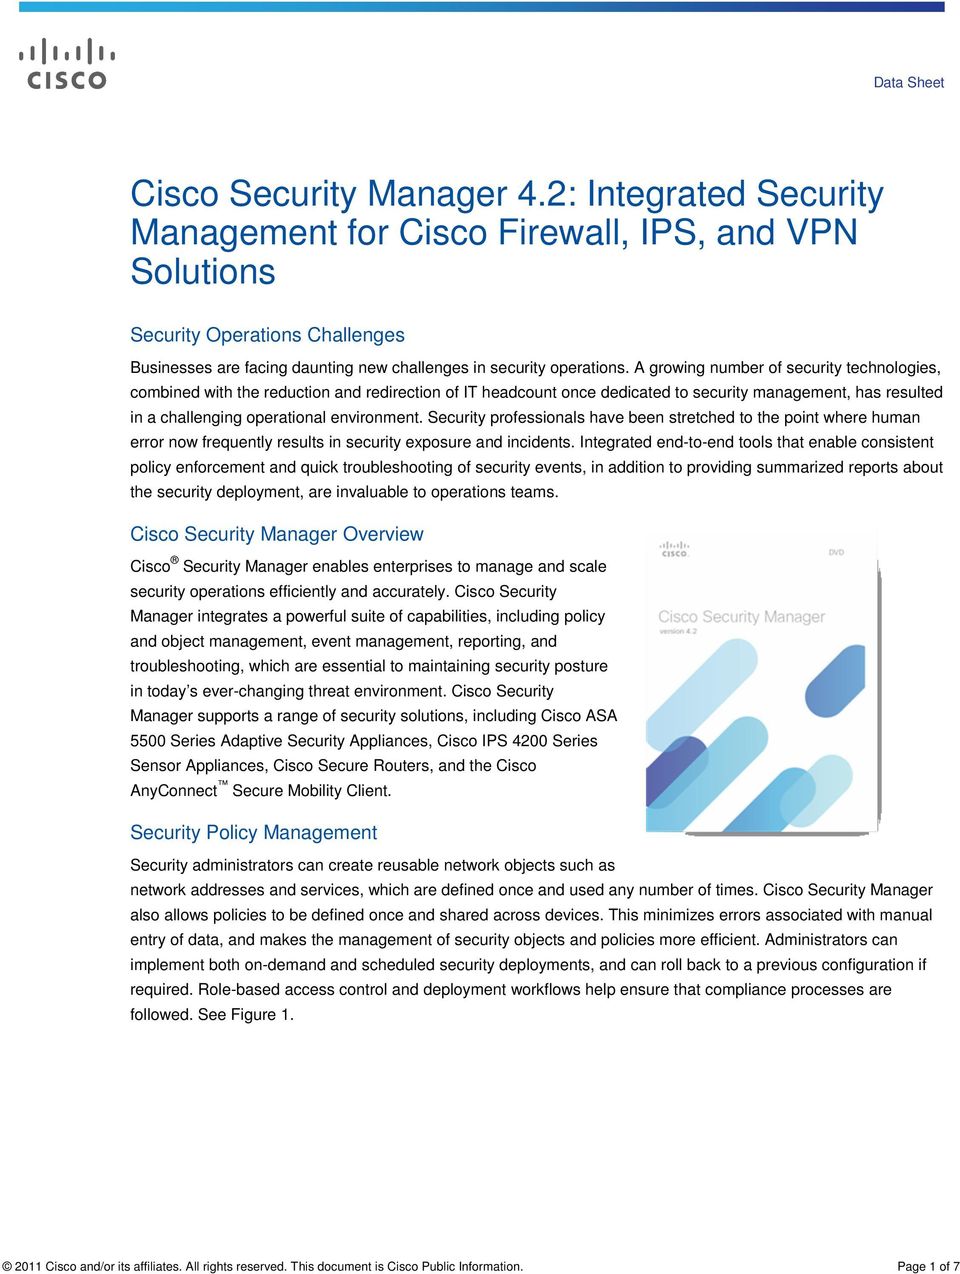 A growing number of security technologies, combined with the reduction and redirection of IT headcount once dedicated to security management, has resulted in a challenging operational environment.